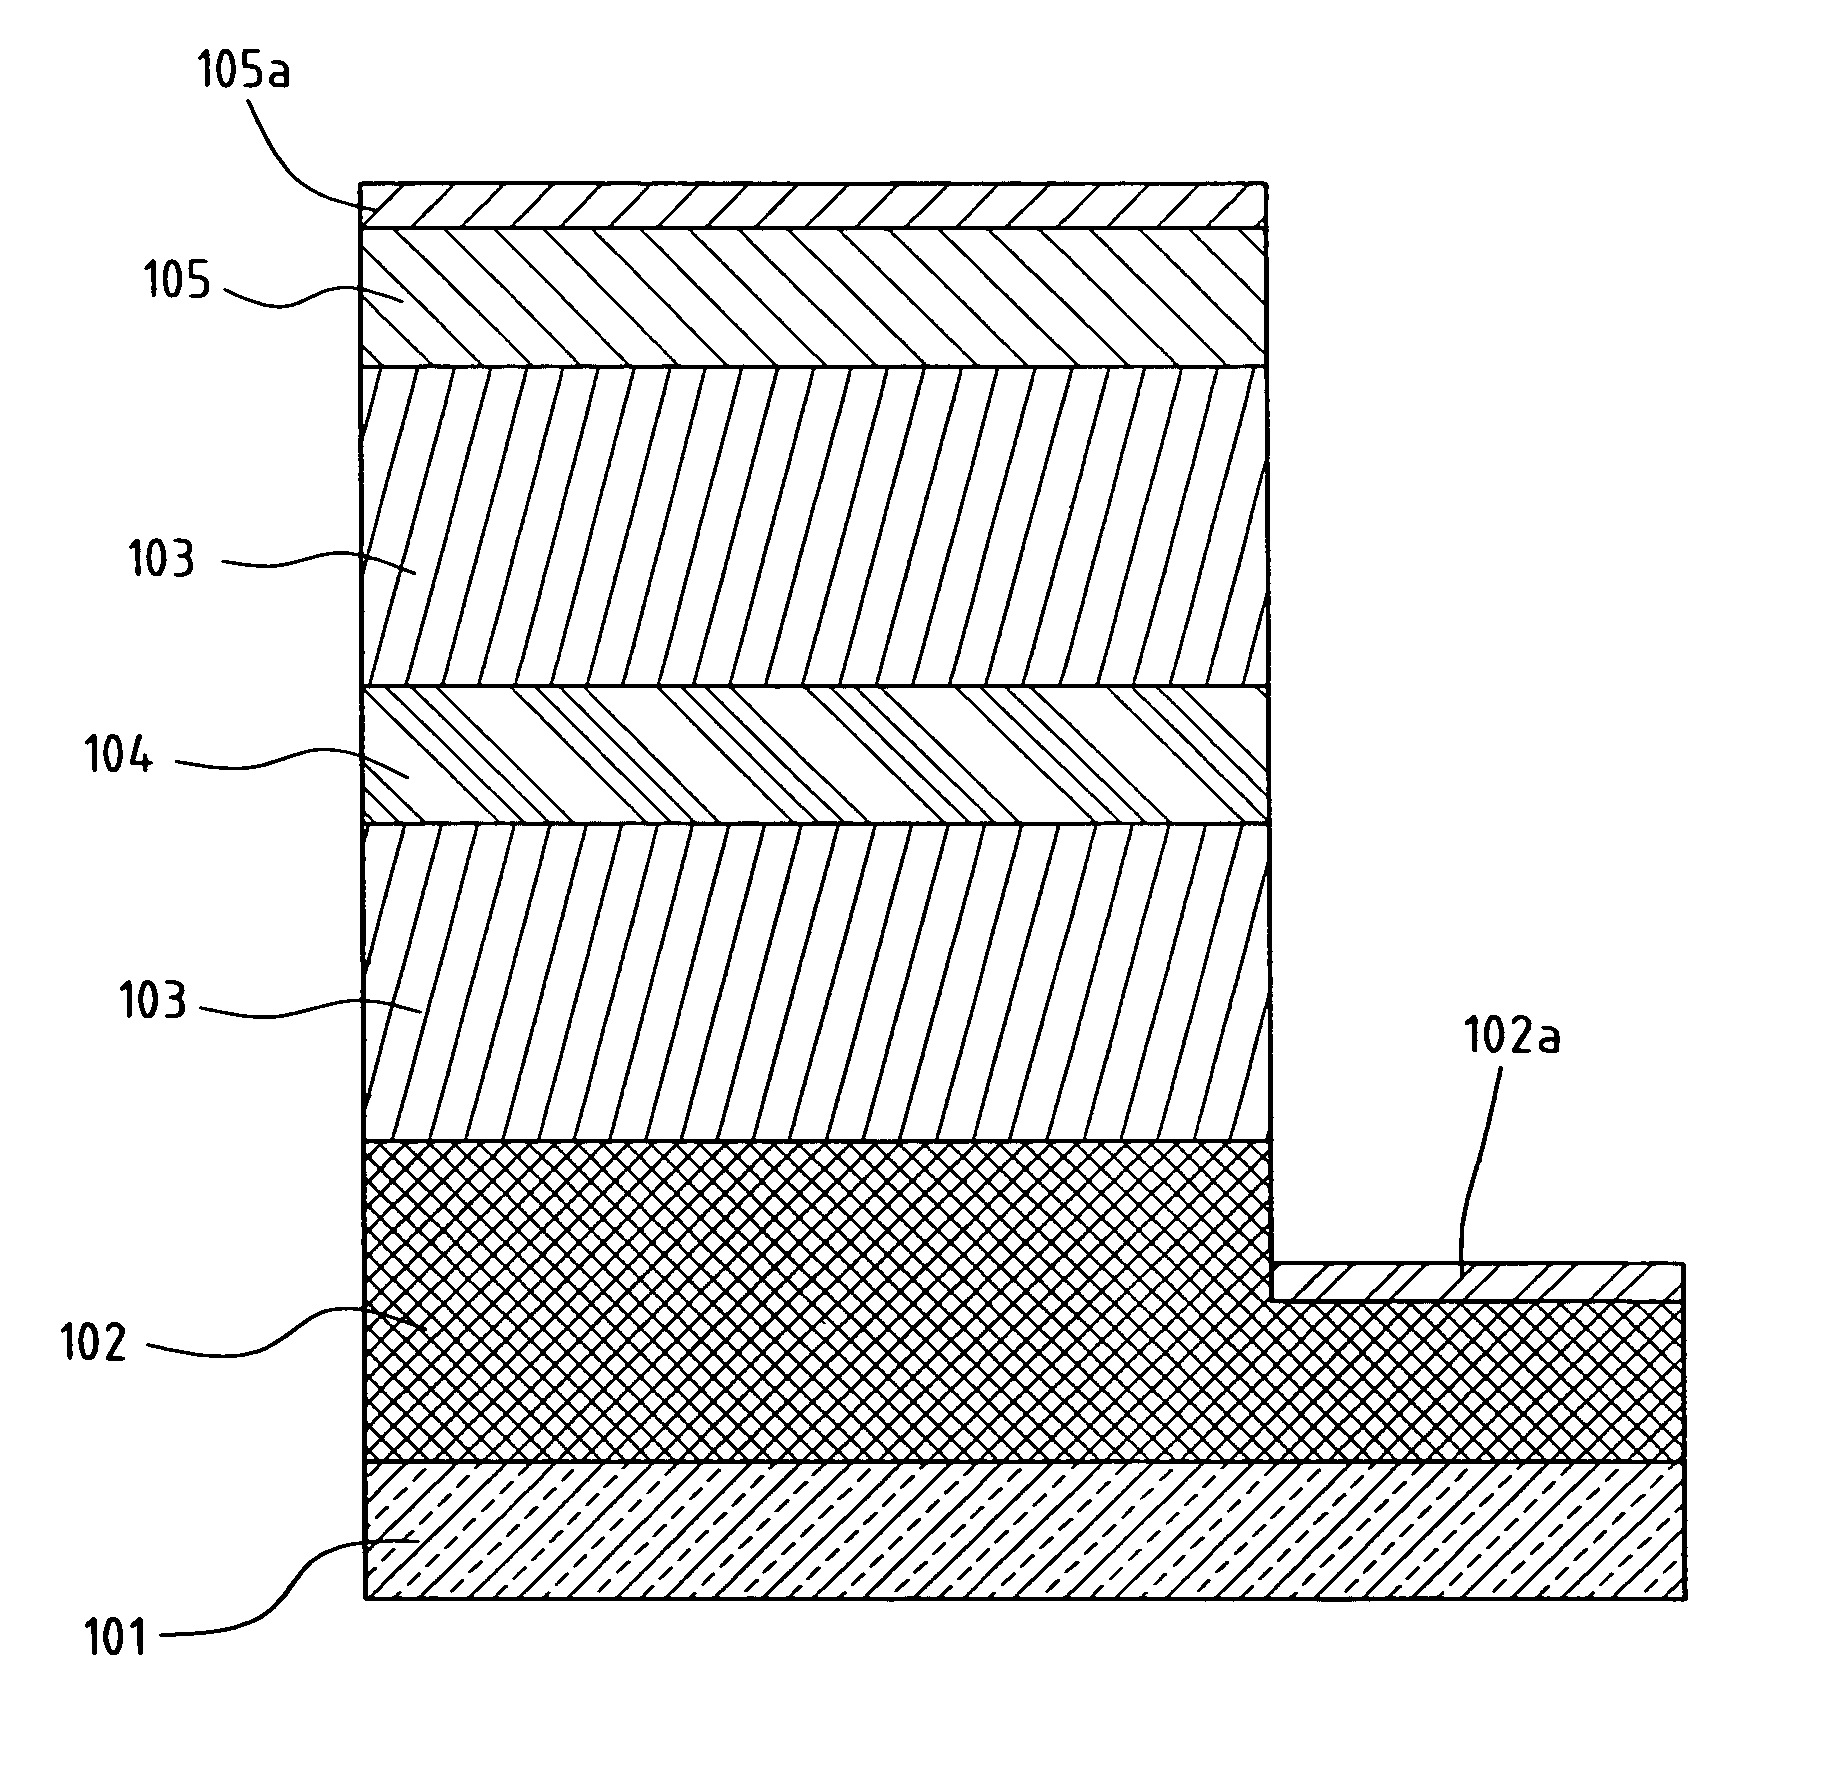 Gallium-nitride based light-emitting diode epitaxial structure